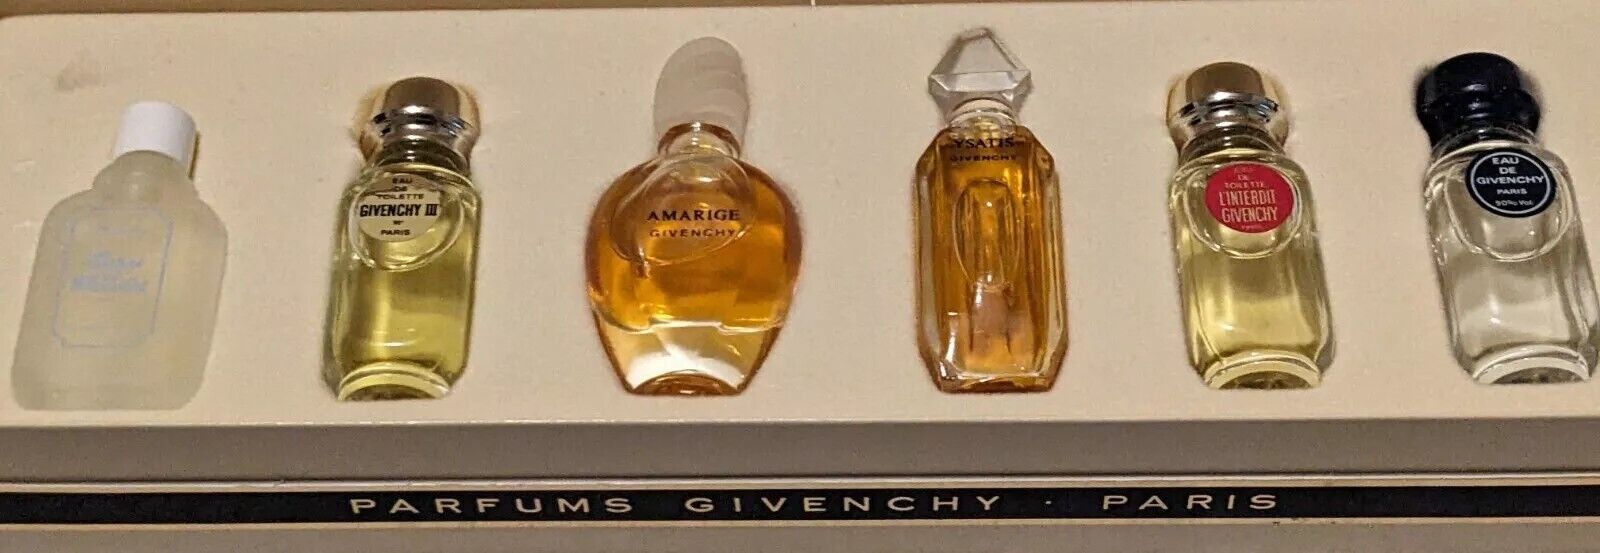 Givenchy Coffret Collection Parfums Vintage Set New;As Seen As Pictures